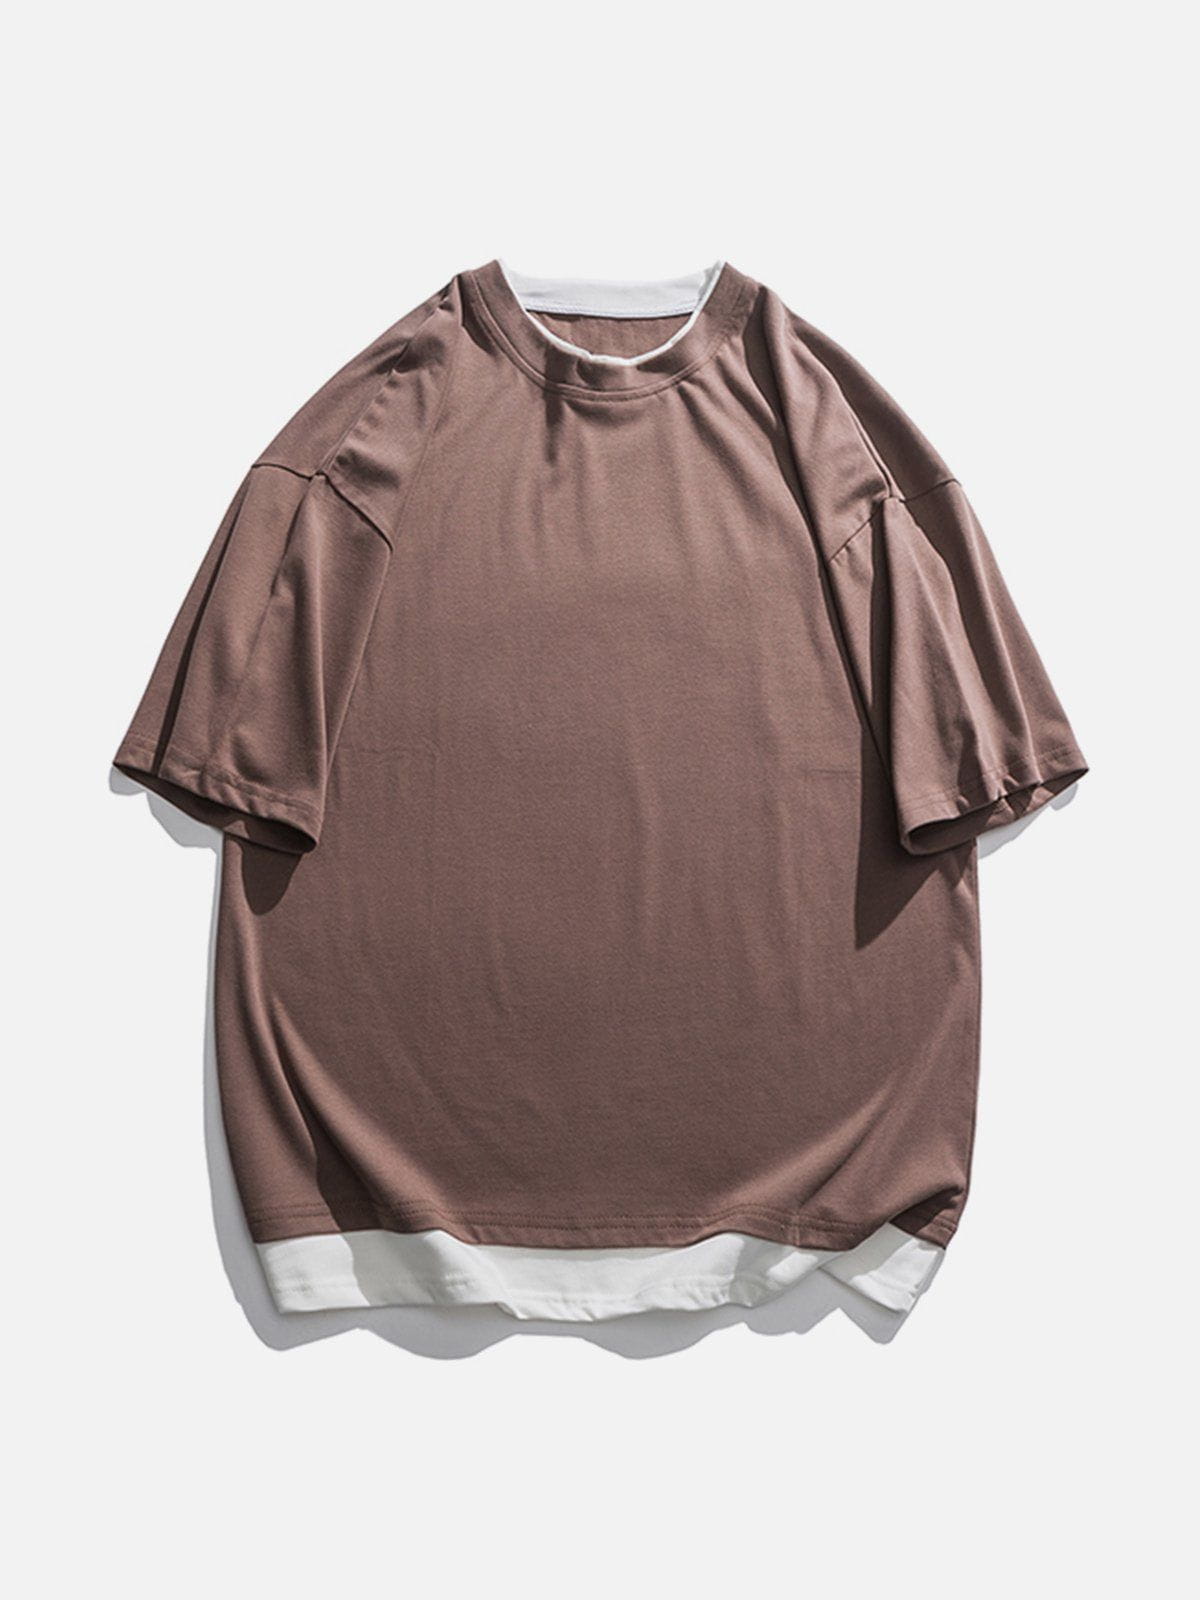 Sneakerland™ - Solid Essential Cotton Tee